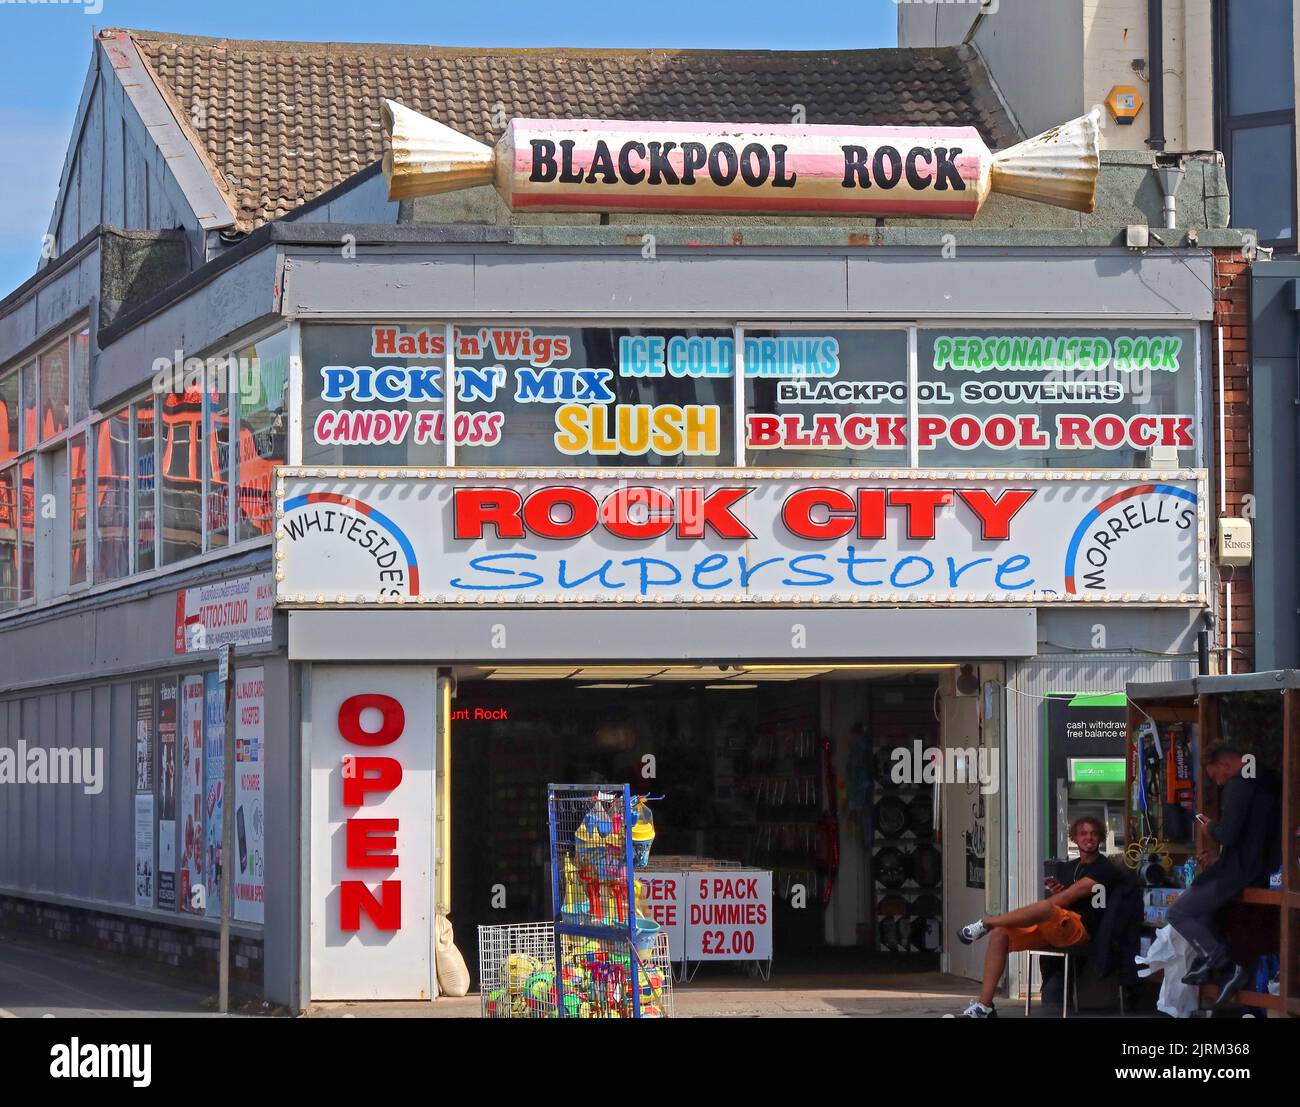 Whitesides Blackpool Rock City Superstore, menthe, Peardrop, anis, fruit, Fizzy Cola, Lancashire, Angleterre, Royaume-Uni, FY1 Banque D'Images